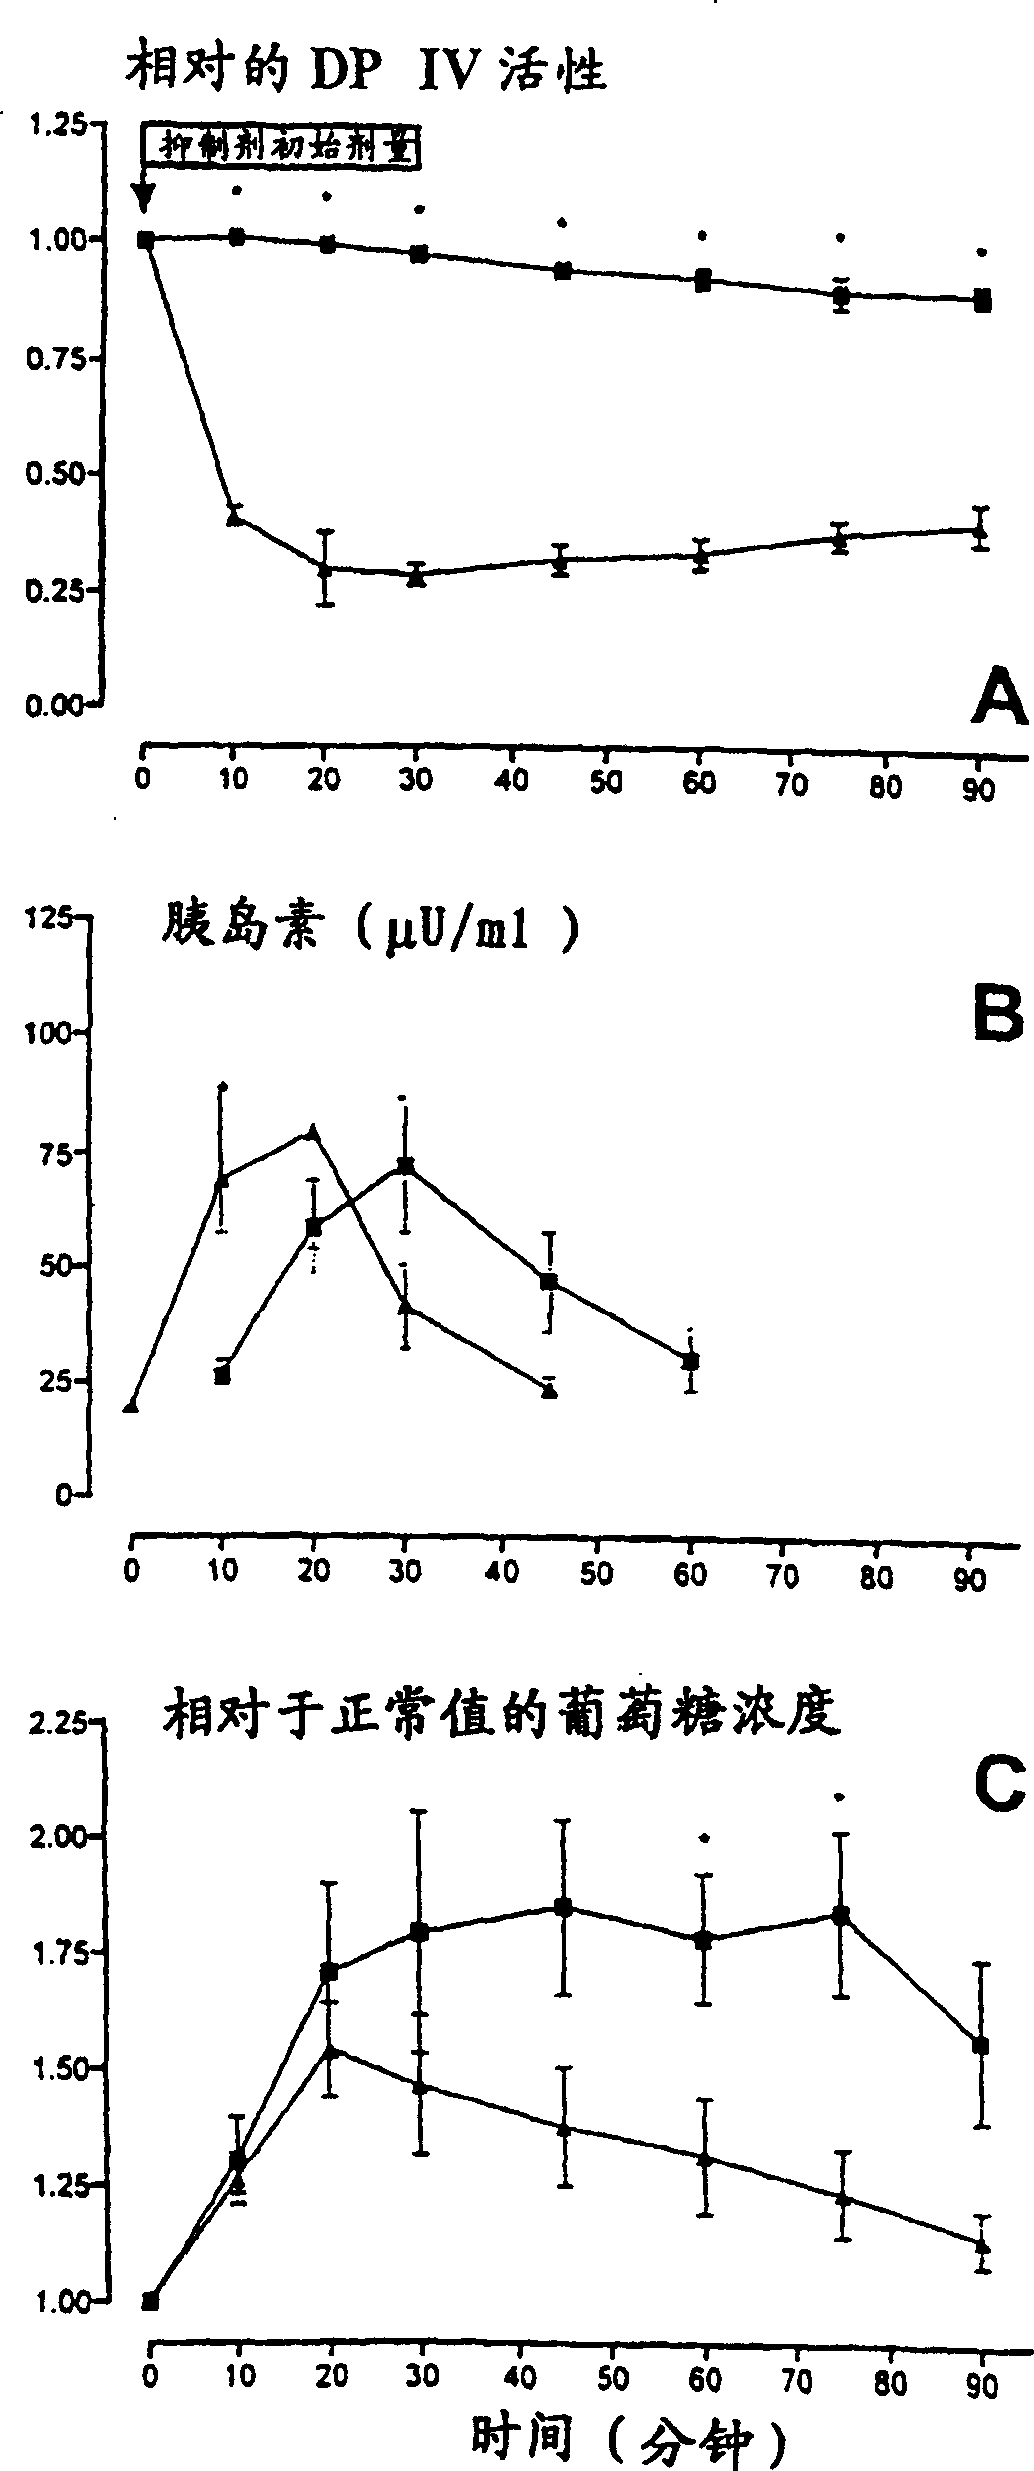 Application of dipeptide base peptidase IV effector for reducing blood sugar level of mammal